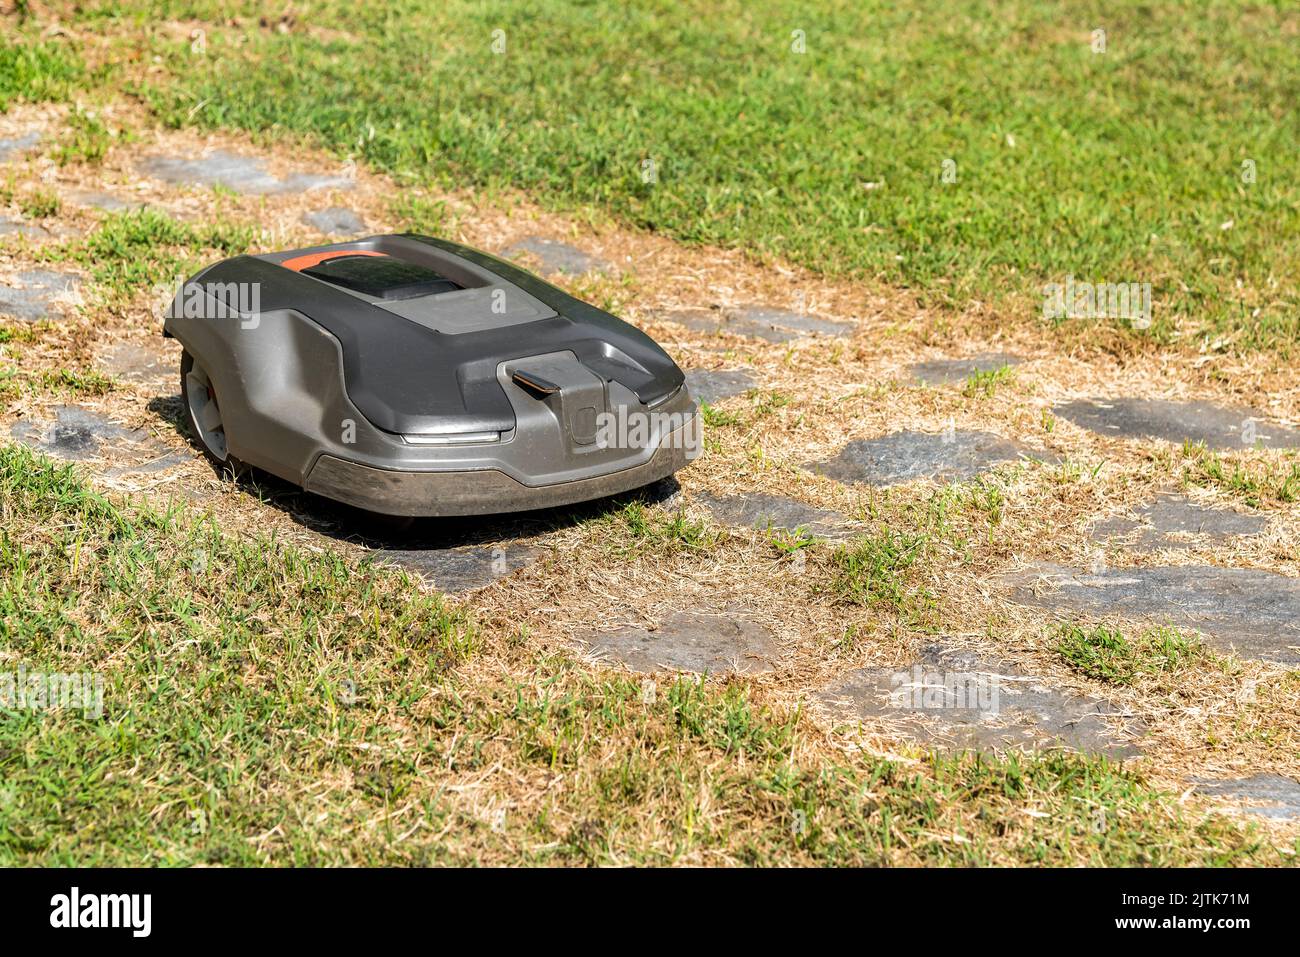 Robotic Lawn Mower cutting grass in the garden in a summer day. Stock Photo